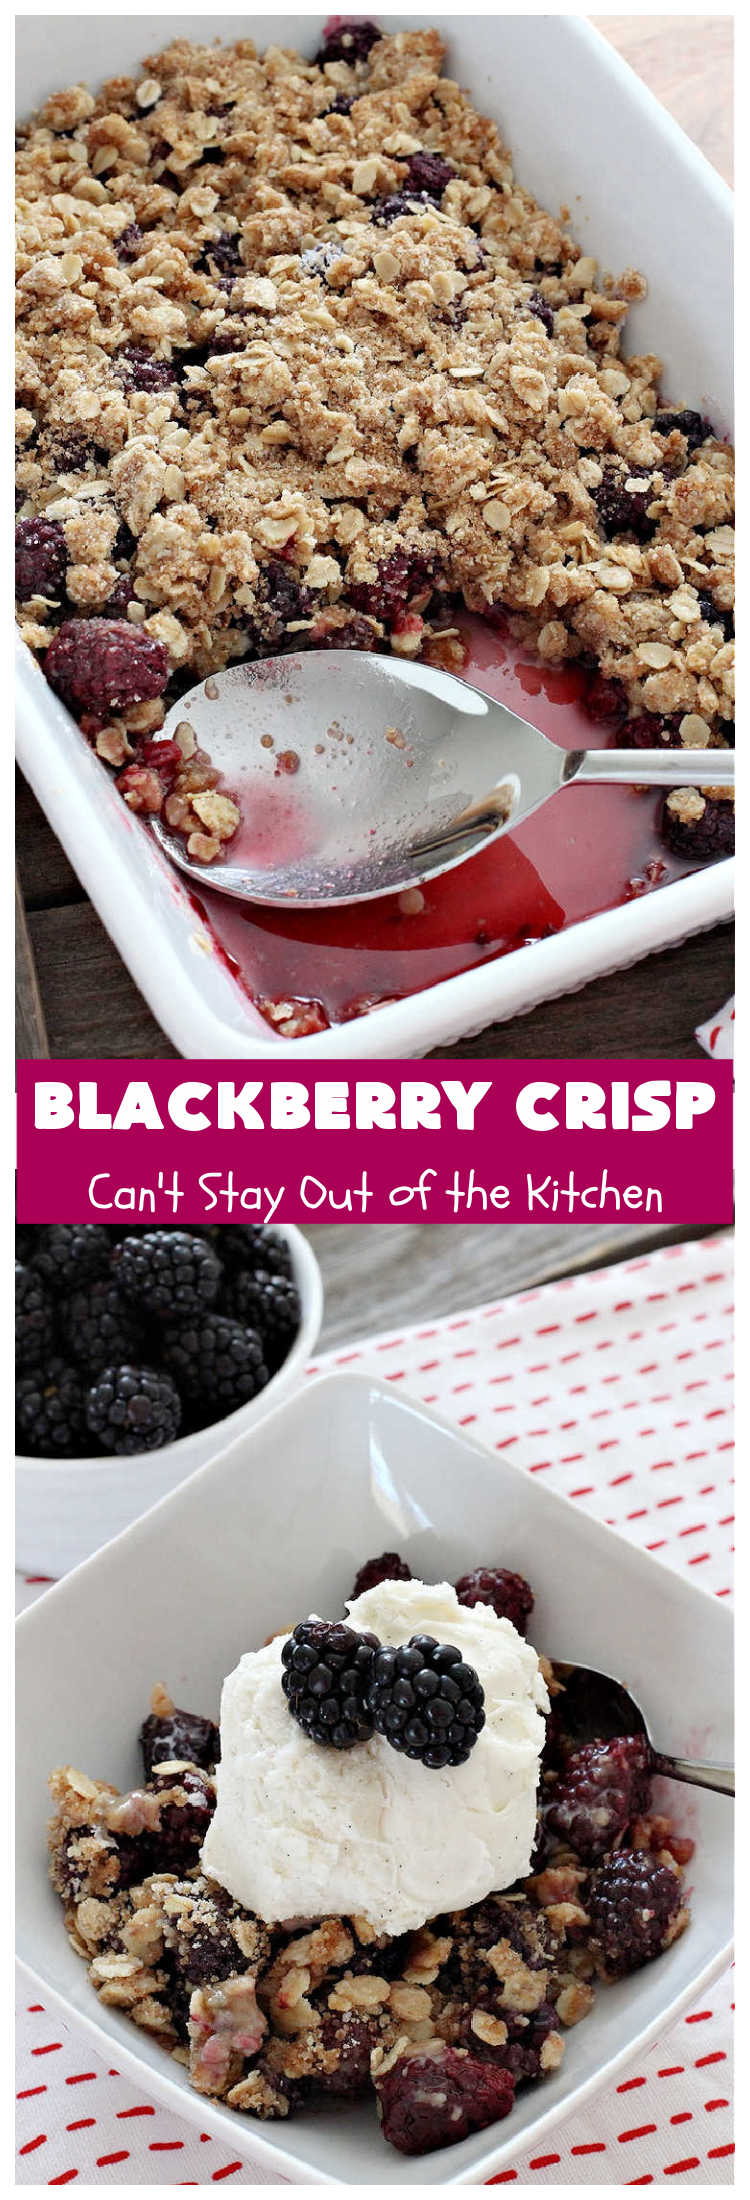 Blackberry Crisp | Can't Stay Out of the Kitchen